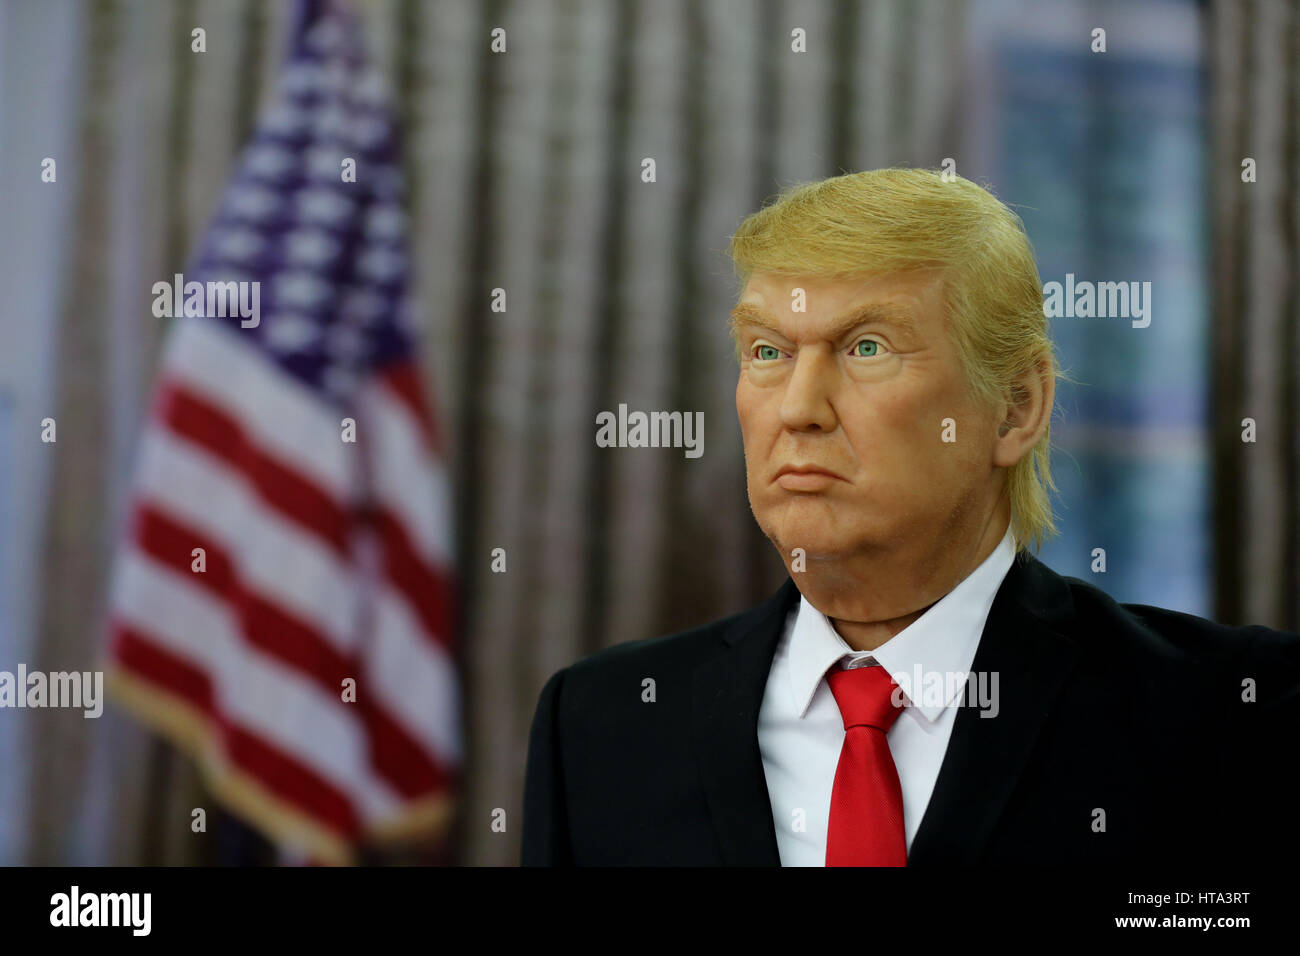 Shenyan, China. 9th Mar, 2017. A wax figure of Donald Trump at an expo in Shenyang, northeast China. Wax figures of Chinese and international celebrities can be seen at an expo in Shenyang, northeast China's Liaoning Provice, March 9th, 2017. Credit: SIPA Asia/ZUMA Wire/Alamy Live News Stock Photo